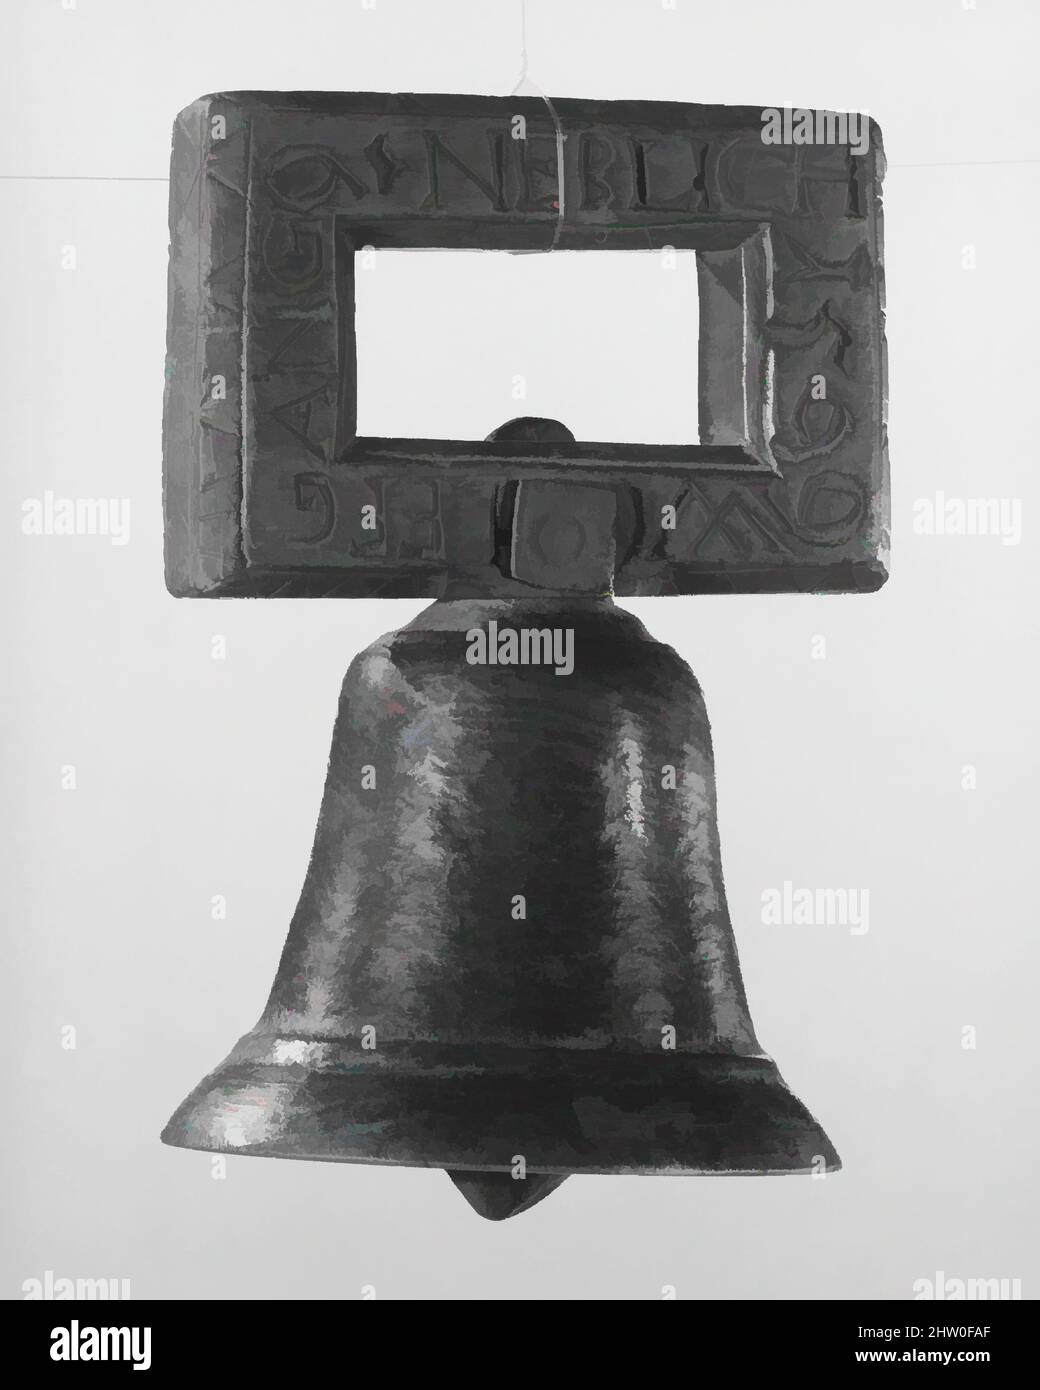 Art inspired by Bell, 1599, Germany, German, Bronze, wood, Height: 5 1/2 in. (14 cm), Idiophone-Struck-bell-without clapper, This bell has a curious square wooden handle. Printed on one side: Wolffgang Neblich 1599, Classic works modernized by Artotop with a splash of modernity. Shapes, color and value, eye-catching visual impact on art. Emotions through freedom of artworks in a contemporary way. A timeless message pursuing a wildly creative new direction. Artists turning to the digital medium and creating the Artotop NFT Stock Photo